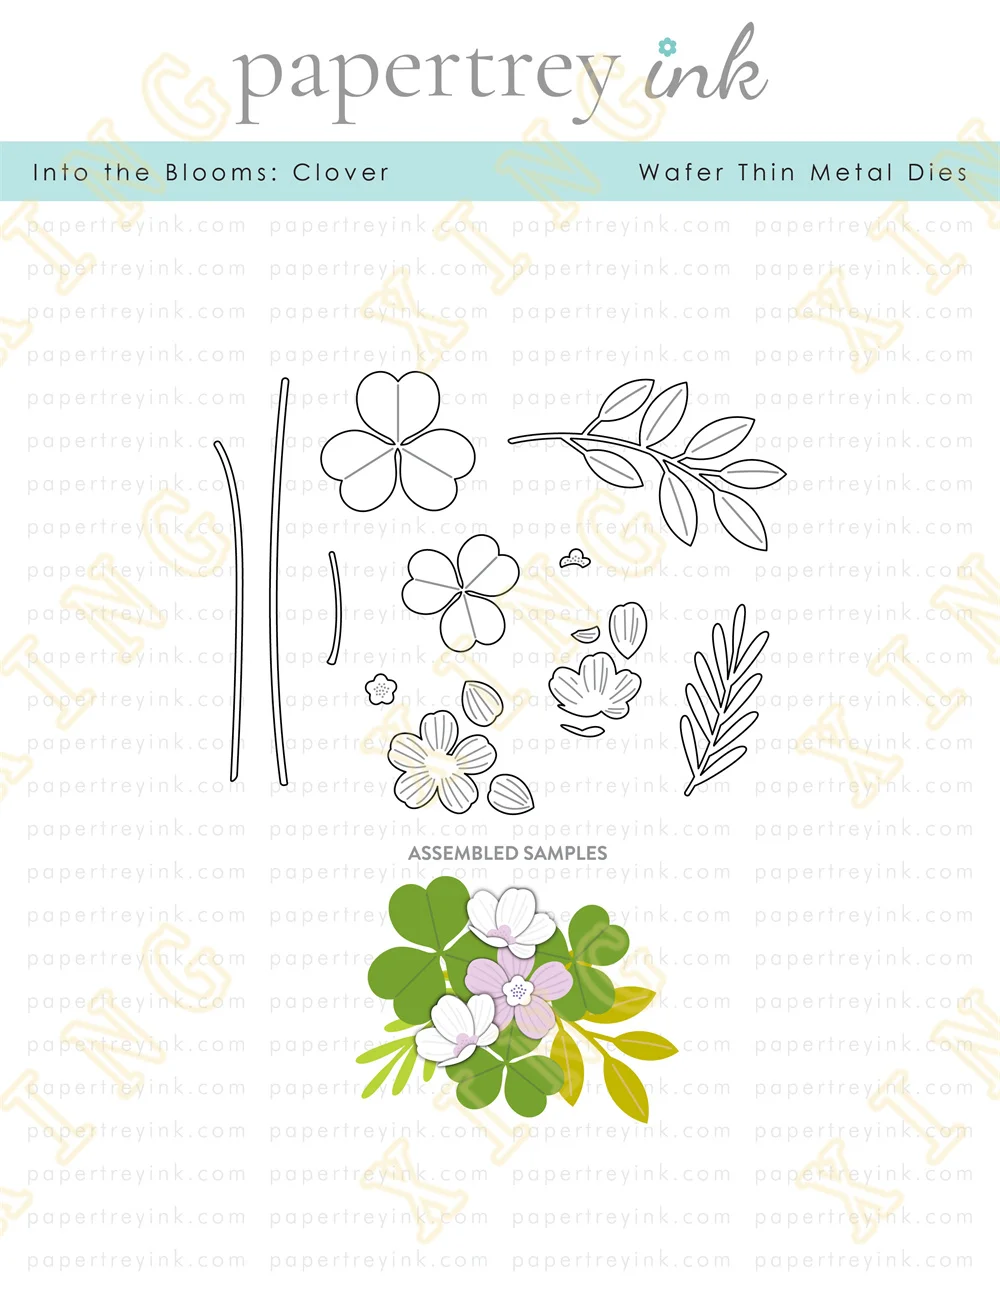 

2023 New Product Into the Blooms Clover Metal Craft Cutting Dies Diy Scrapbook Paper Diary Decoration Card Handmade Embossing